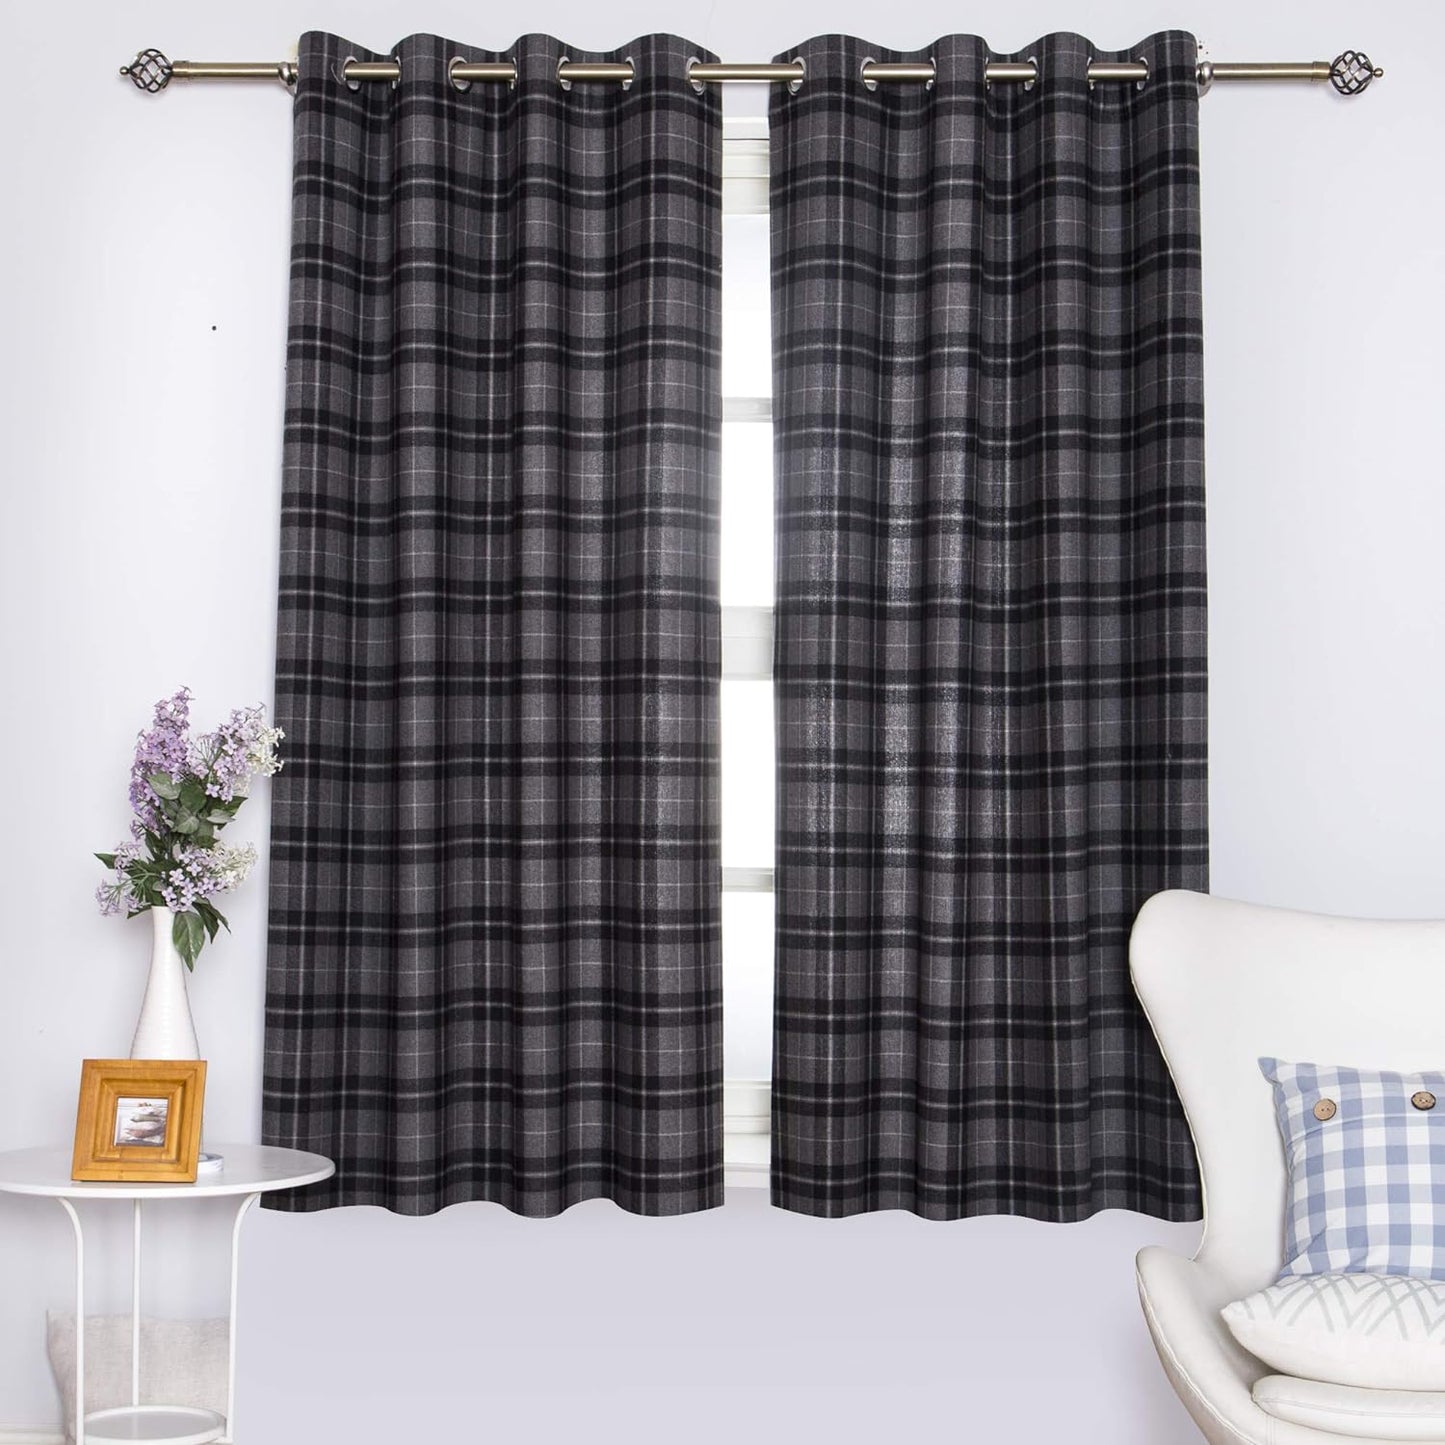 DOLLMEXX Plaid Window Curtains for Bedroom,Lumberjack Fashion Buffalo Style Checks Pattern Retro Style with Grid Composition, Living Room Window Drapes（2 Panels, 52"X84", Black with Grey）  DOLLMEXX Black With Grey 52"X63" 